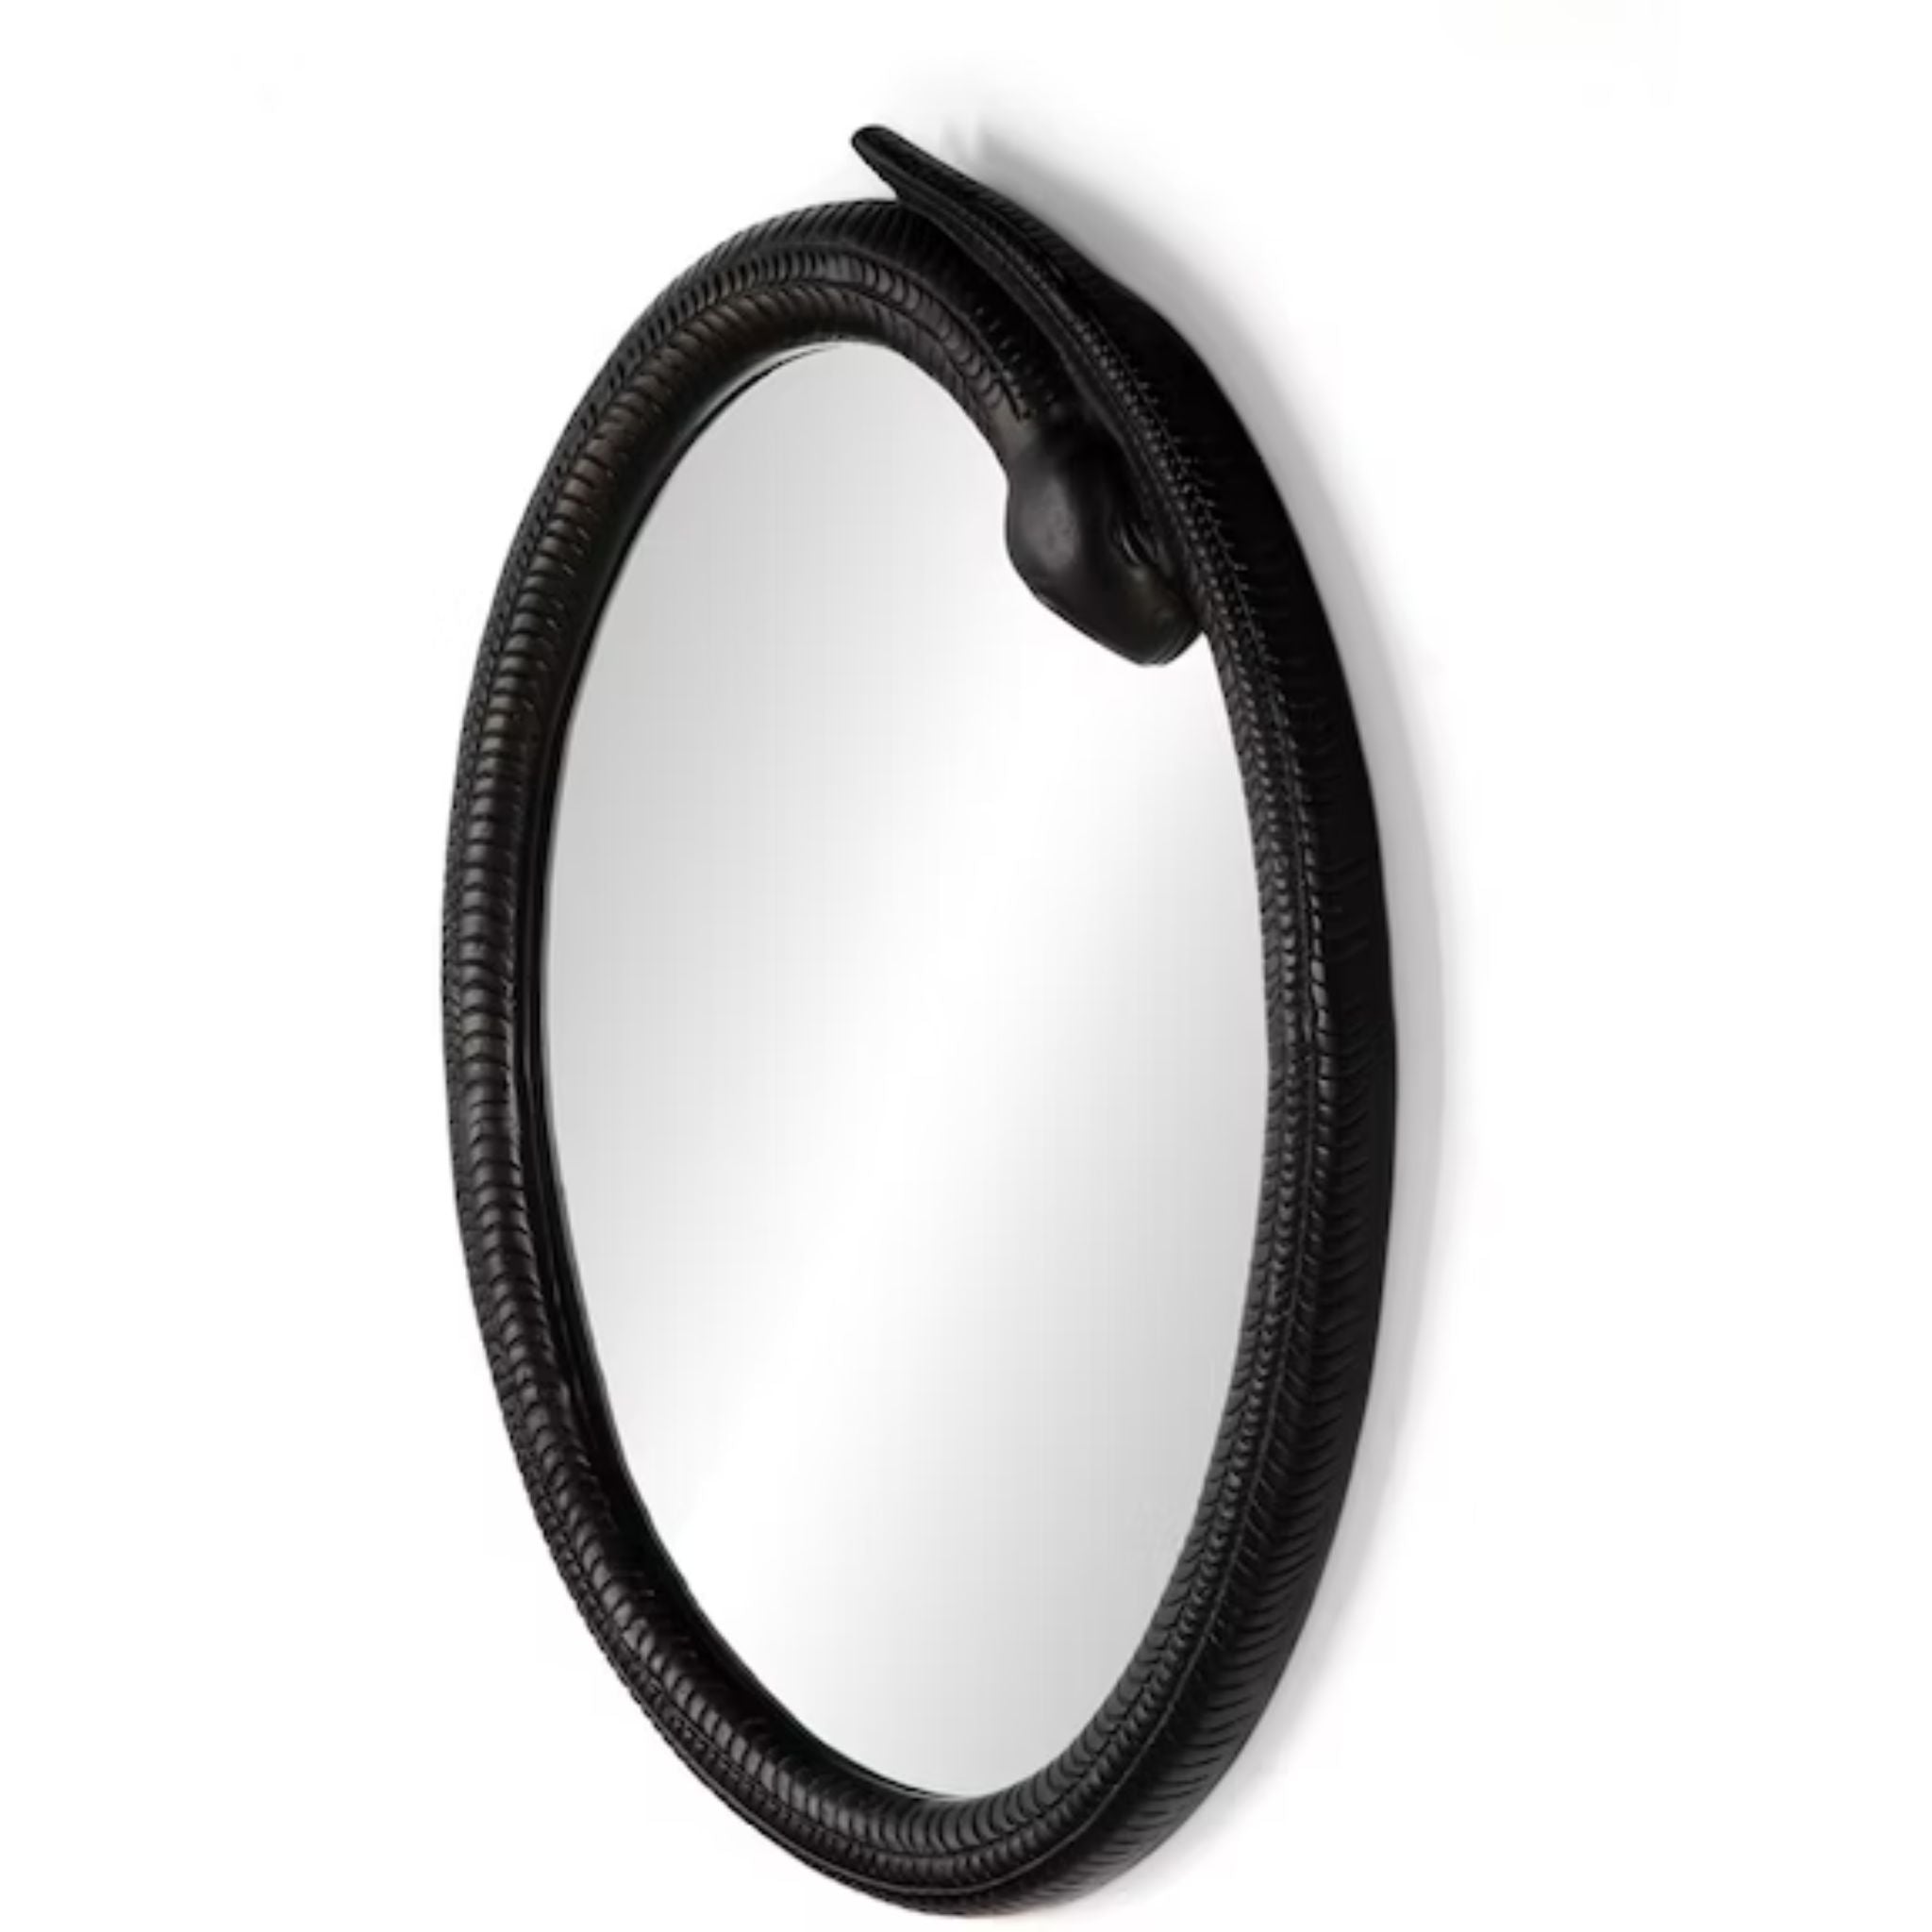 SERPENT MIRROR - BLACK - Simply Elevated Home Furnishings 